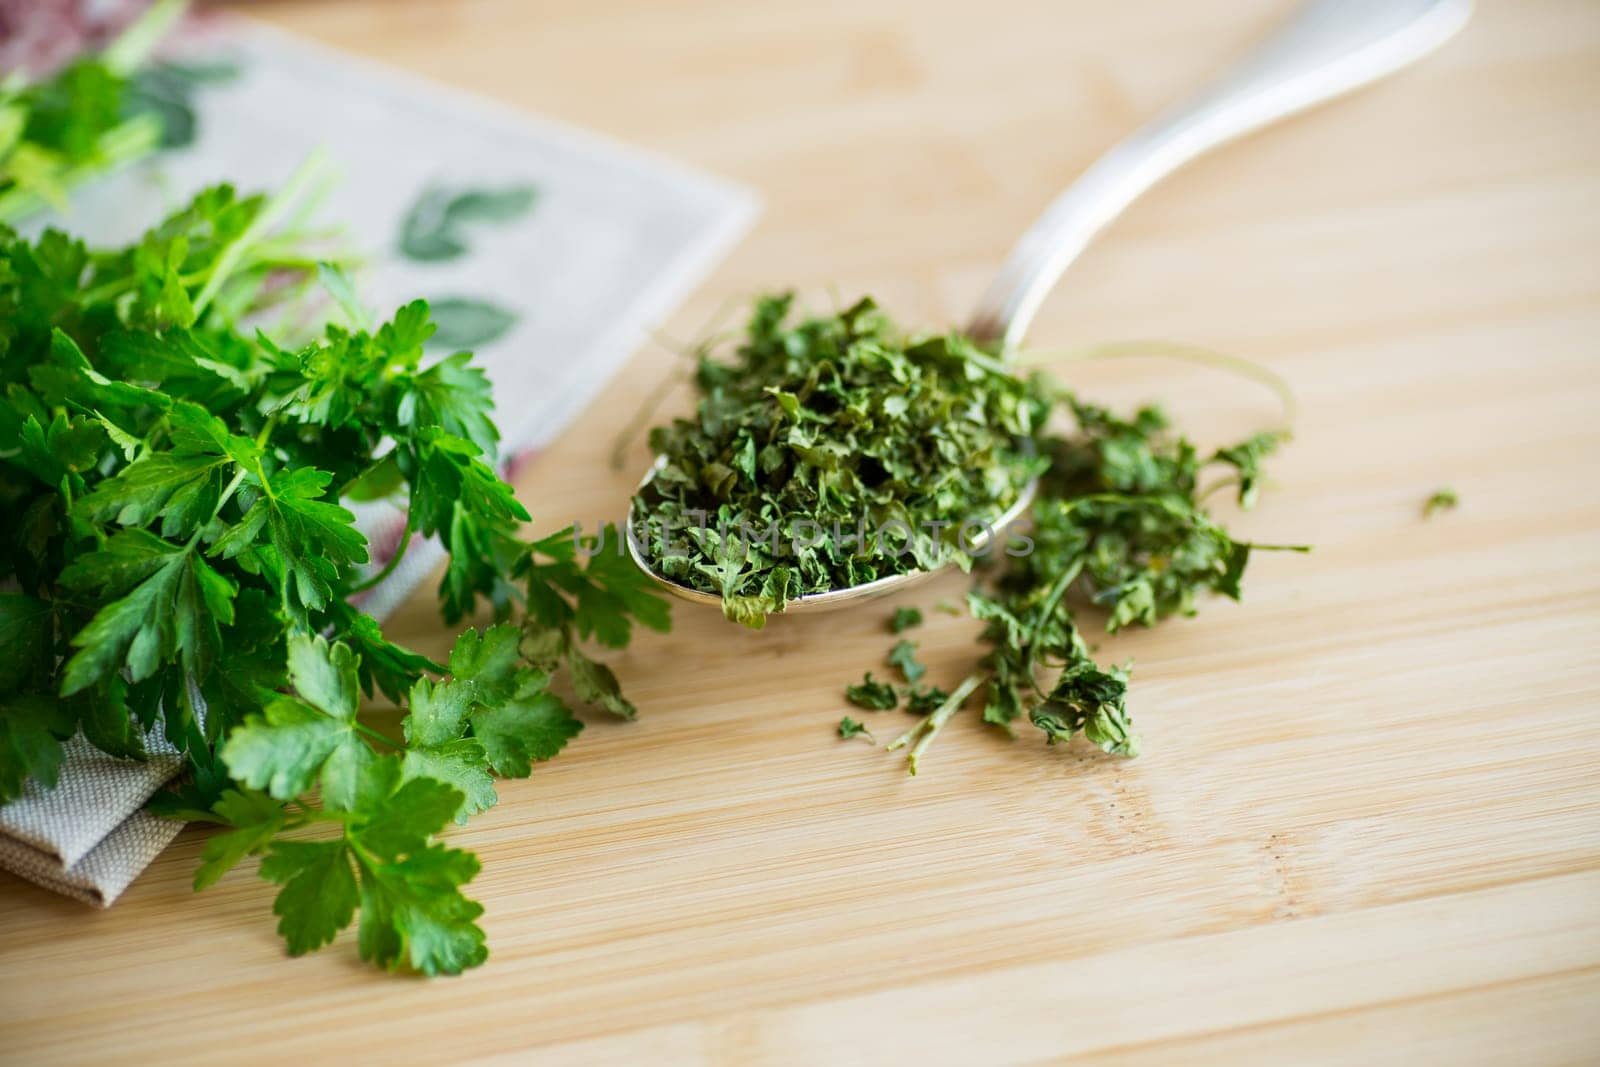 dried parsley in a spoon on a wooden table next to fresh herbs.